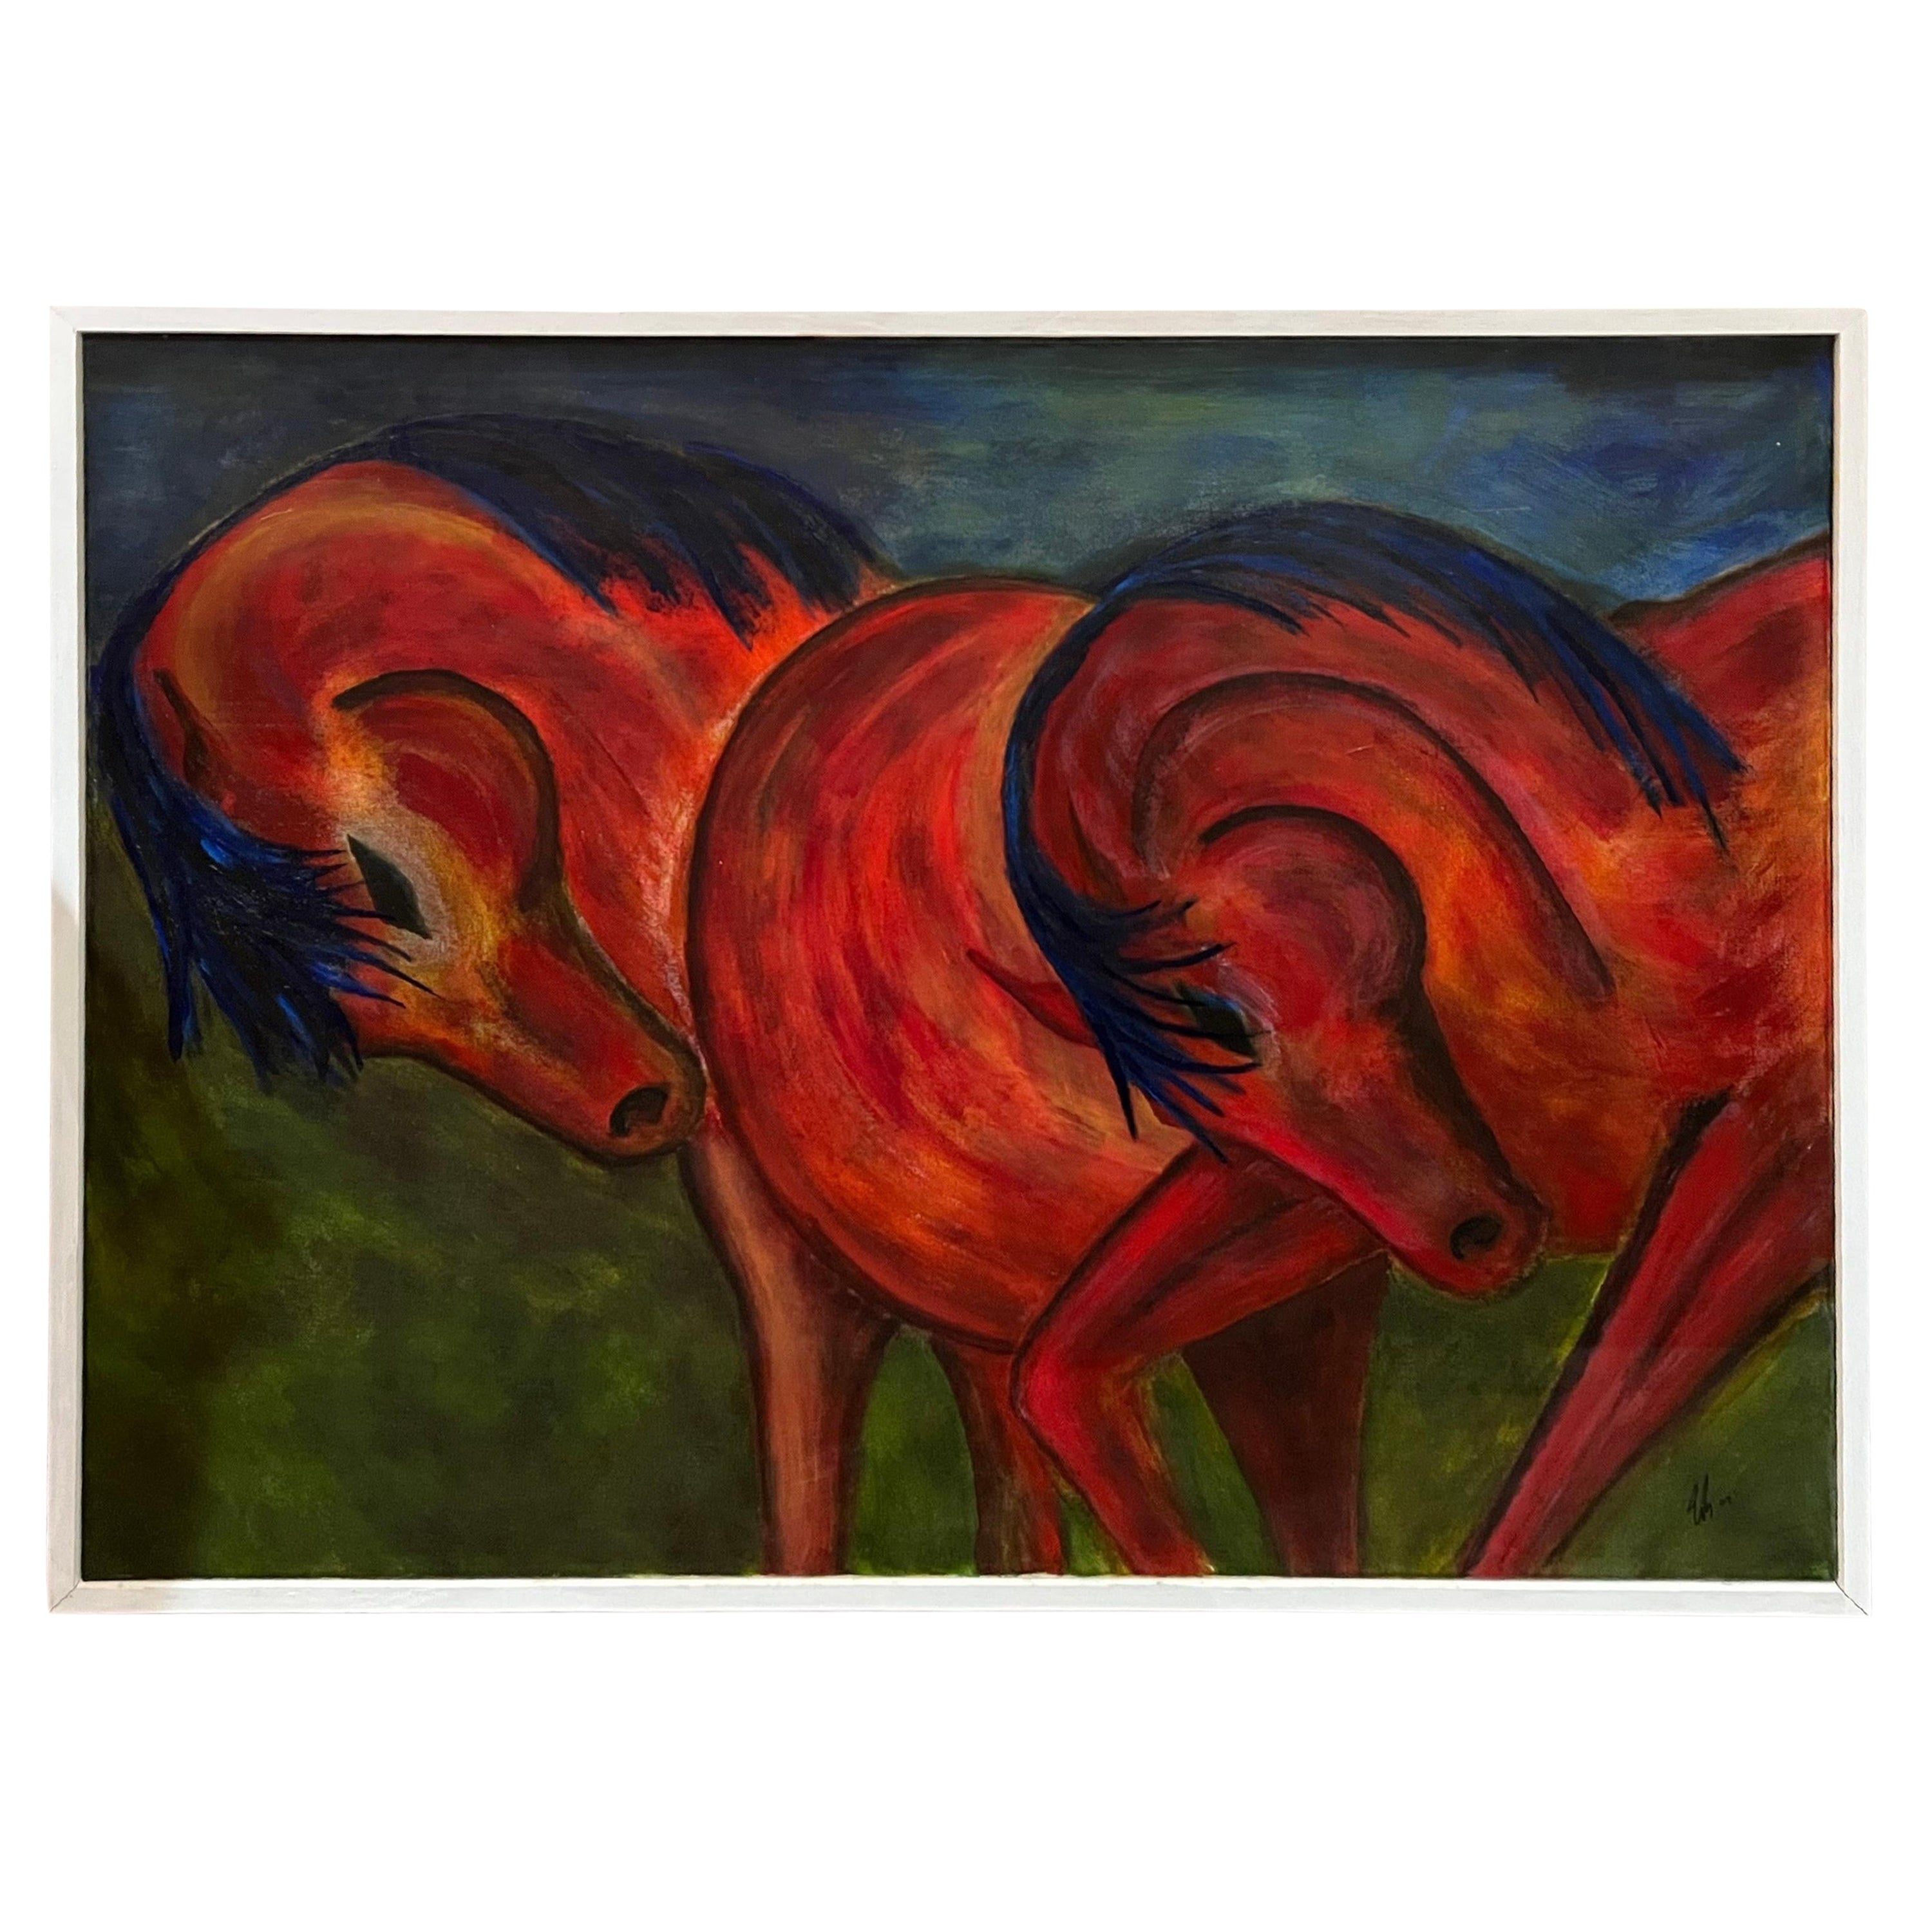 Enormous Framed Contemporary Oil on Canvas of Horses